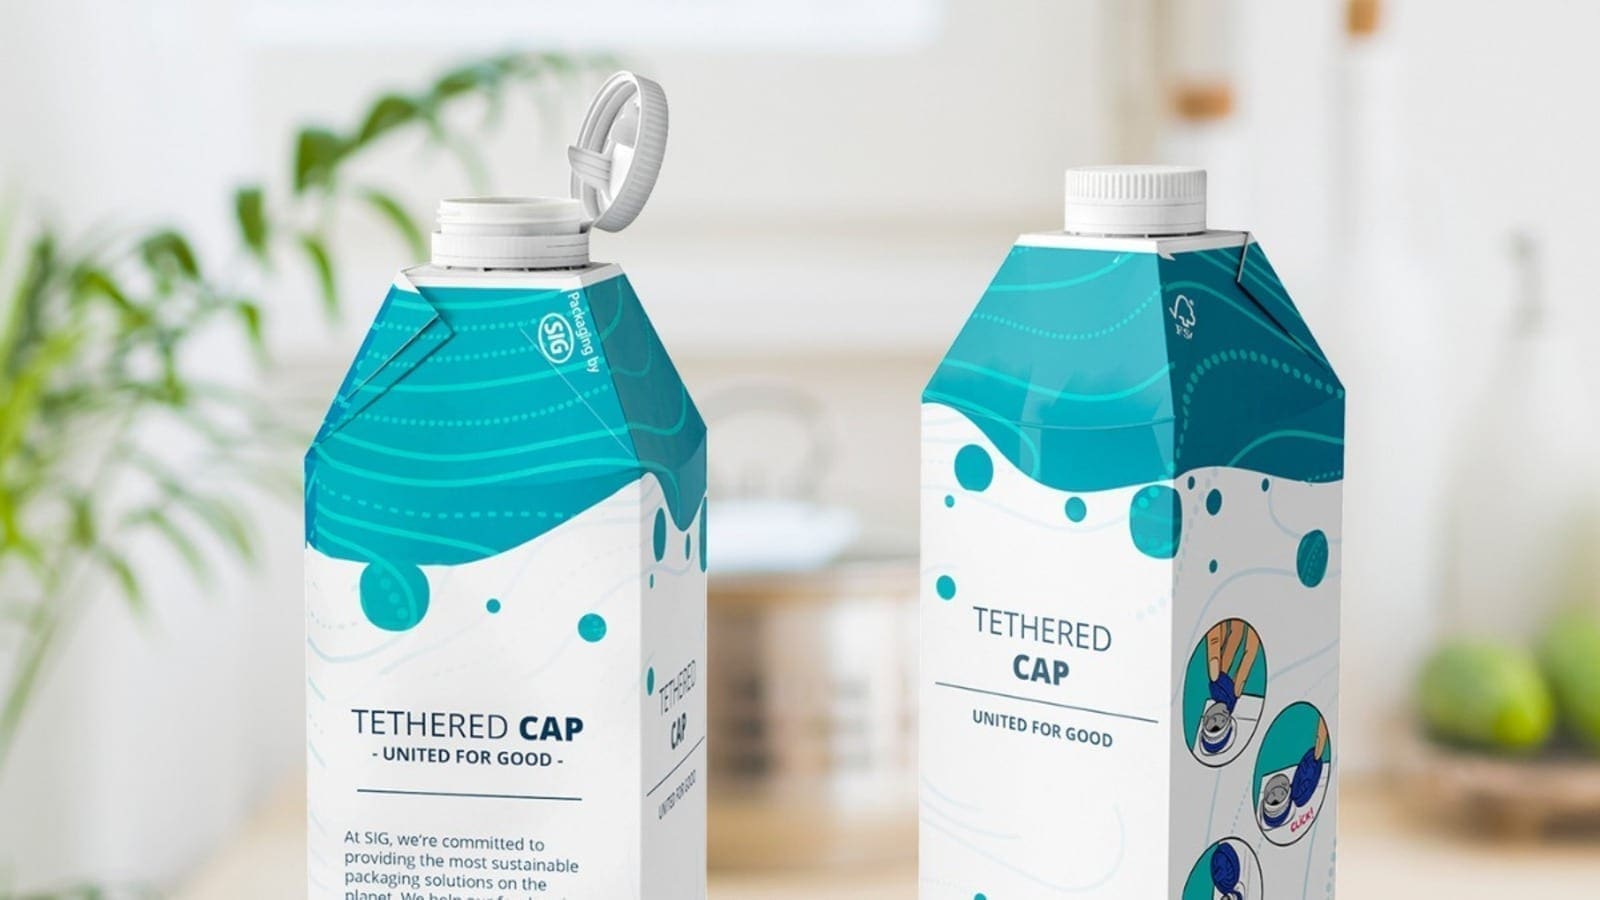 SIG to launch tethered caps for carton packs to help manufacturers meat sustainable packaging goals